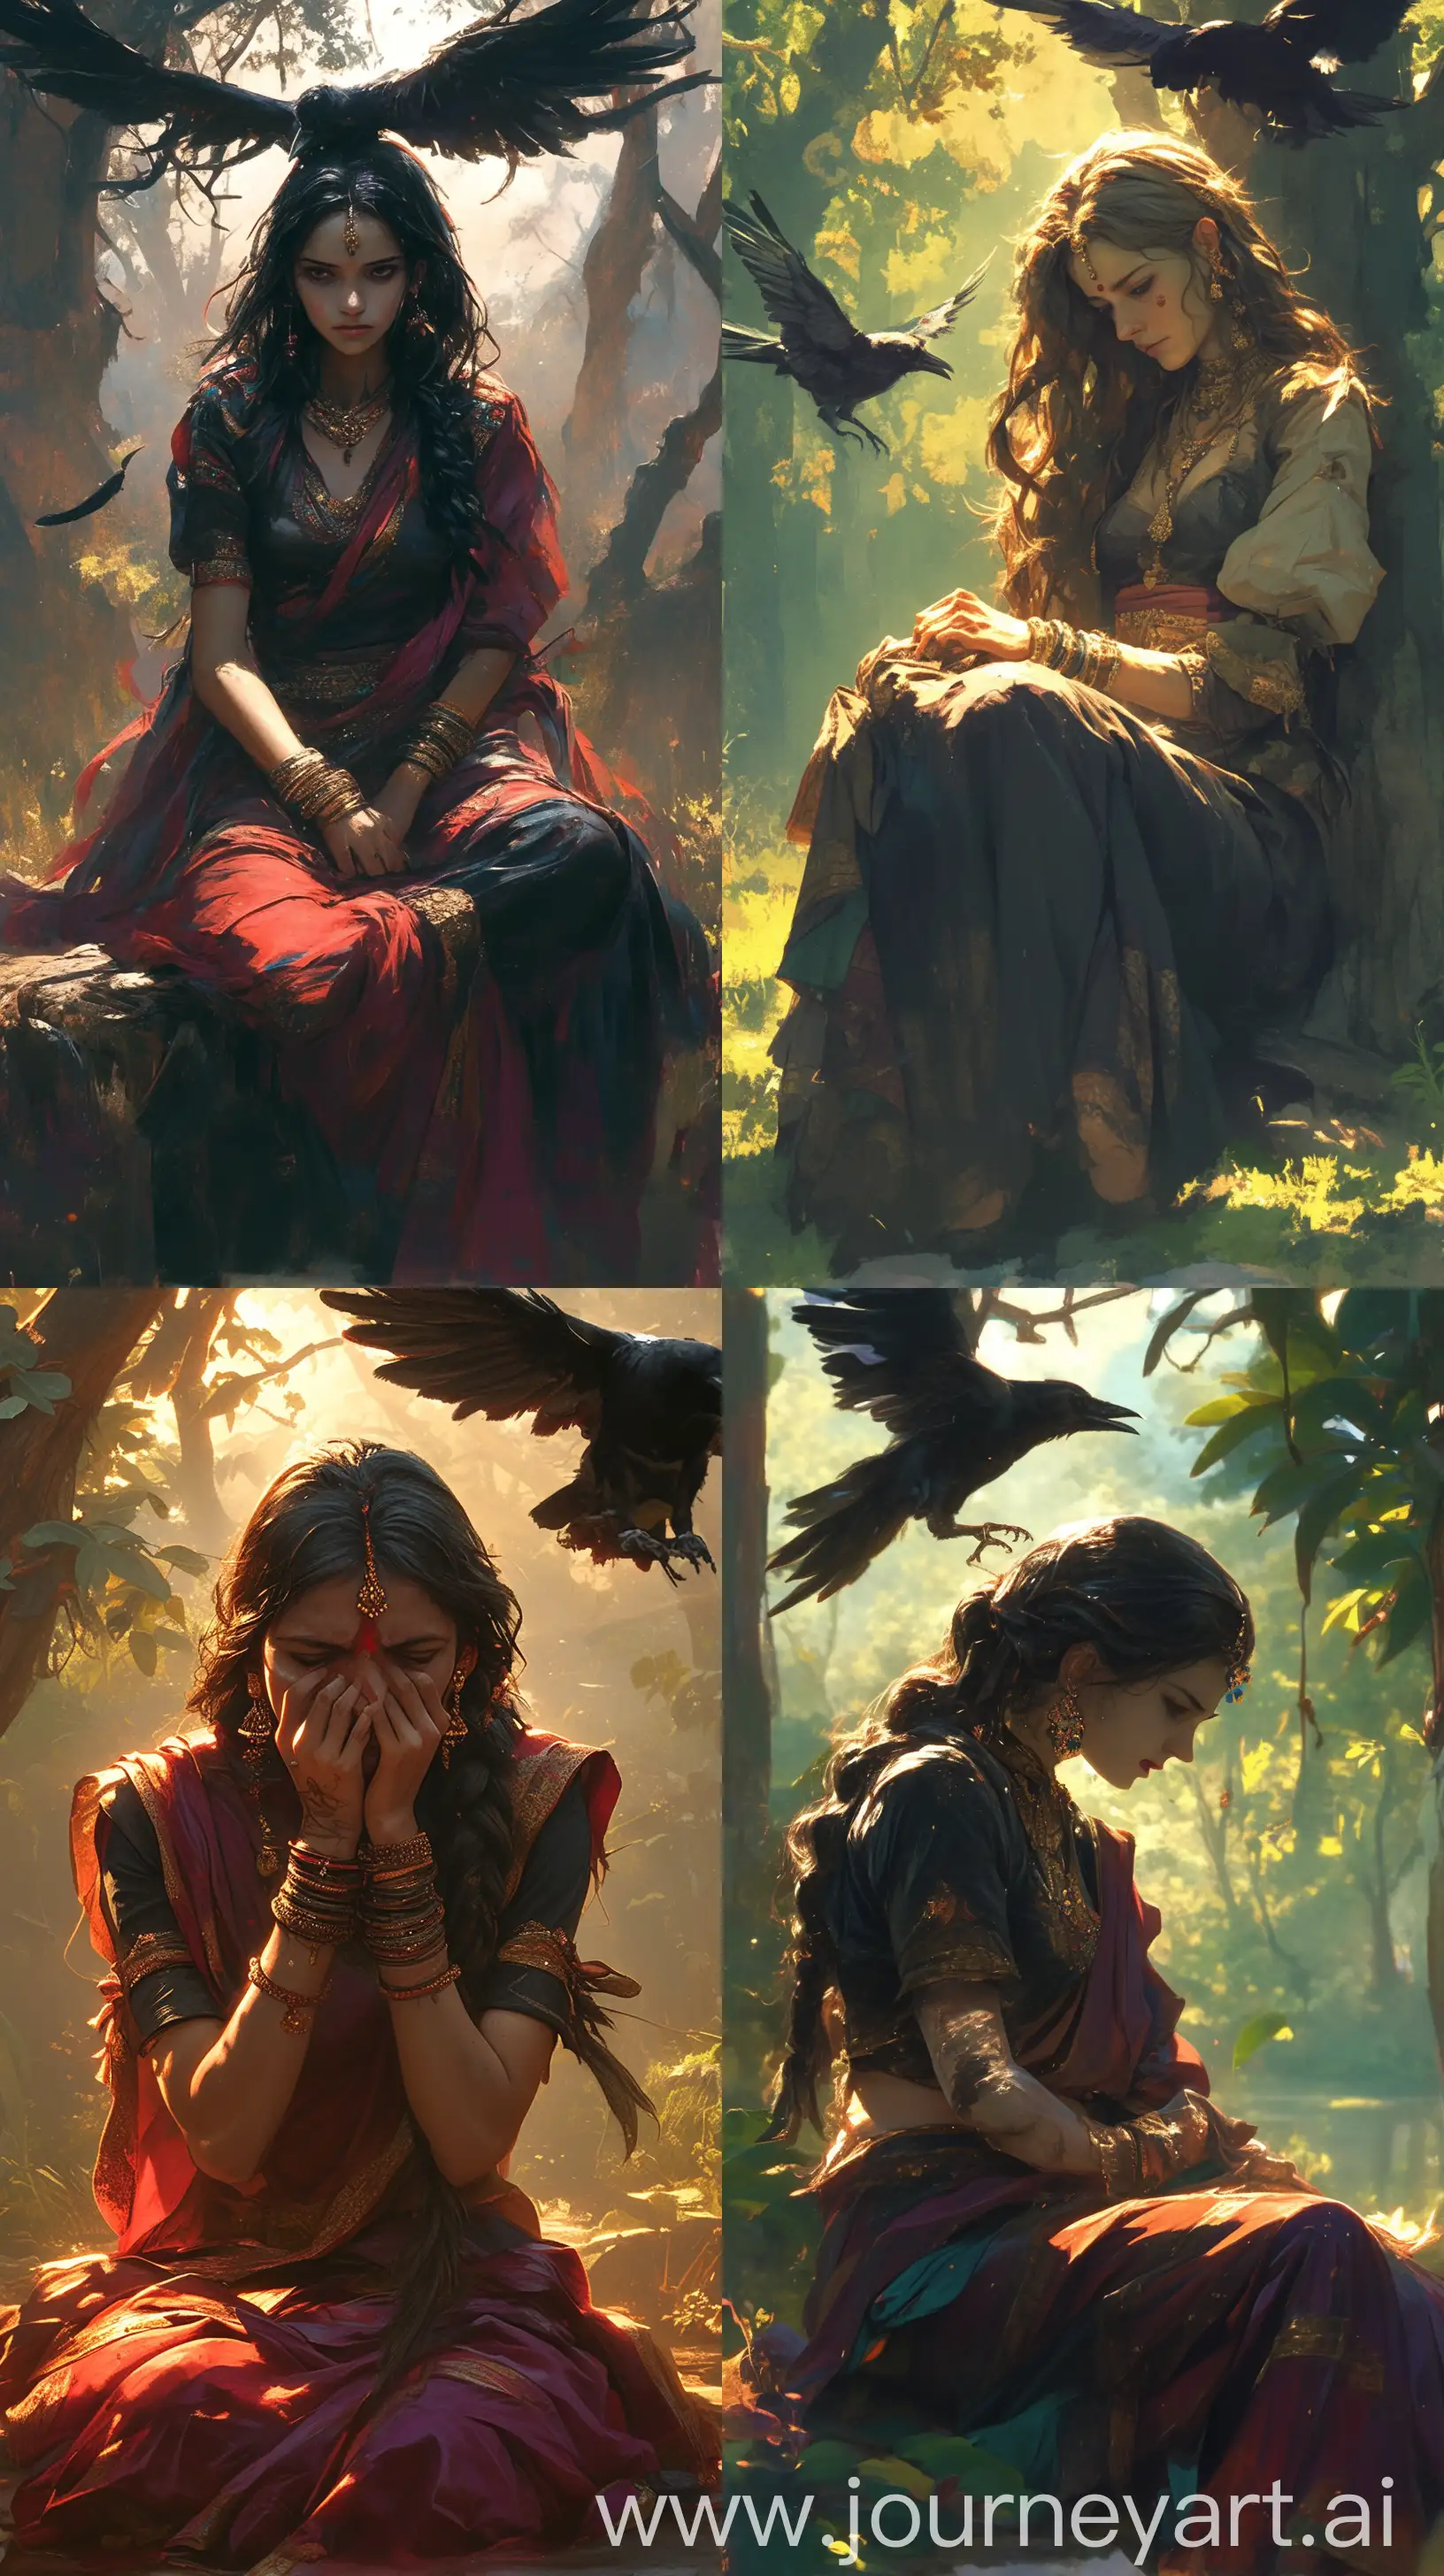 Ancient-Indian-Woman-Expressing-Anguish-with-Crow-in-Serene-Forest-Setting